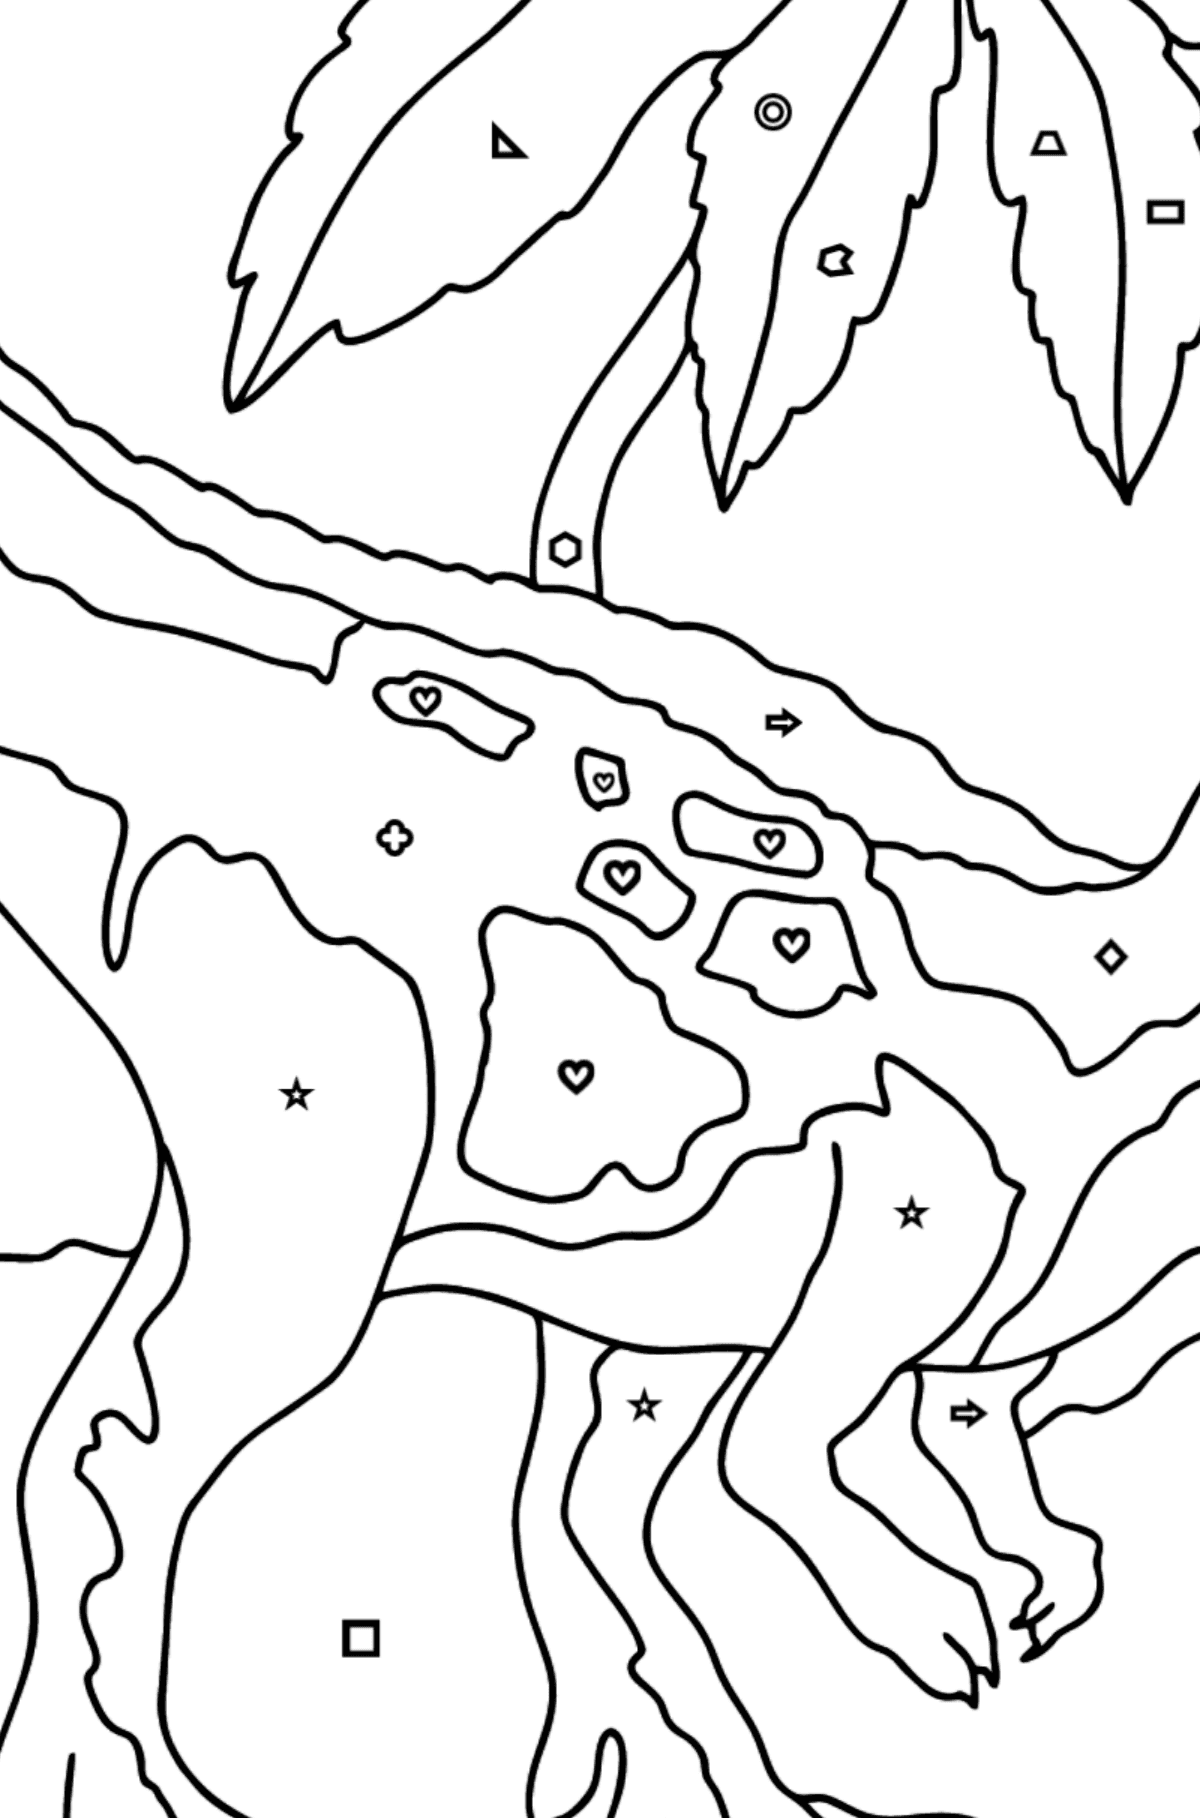 Coloring Page - Tyrannosaurus - The King of Dinosaurs - Coloring by Geometric Shapes for Kids